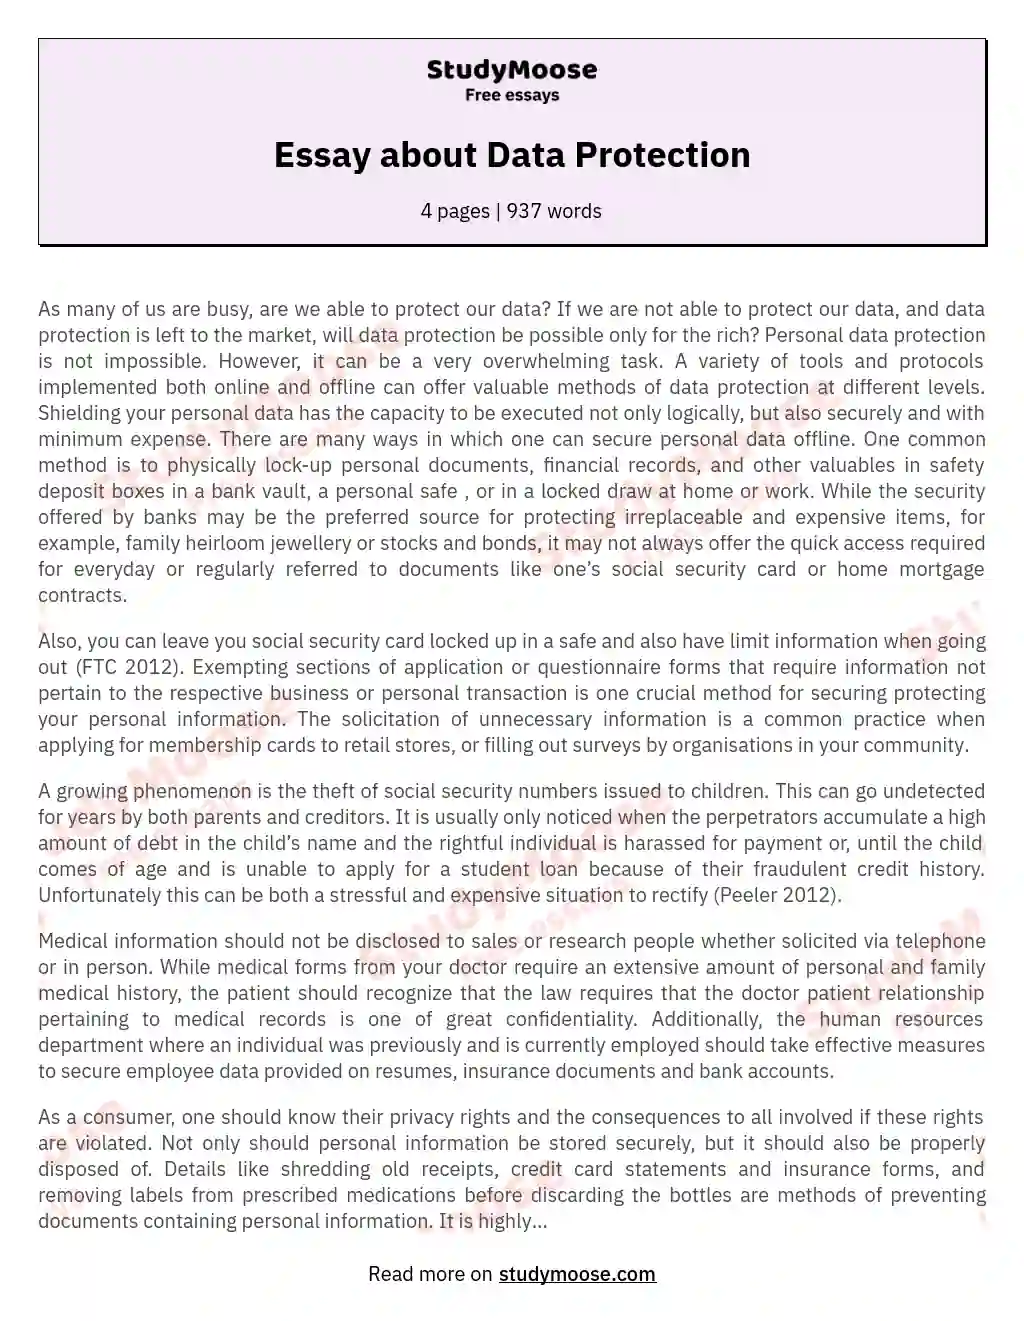 Essay about Data Protection essay